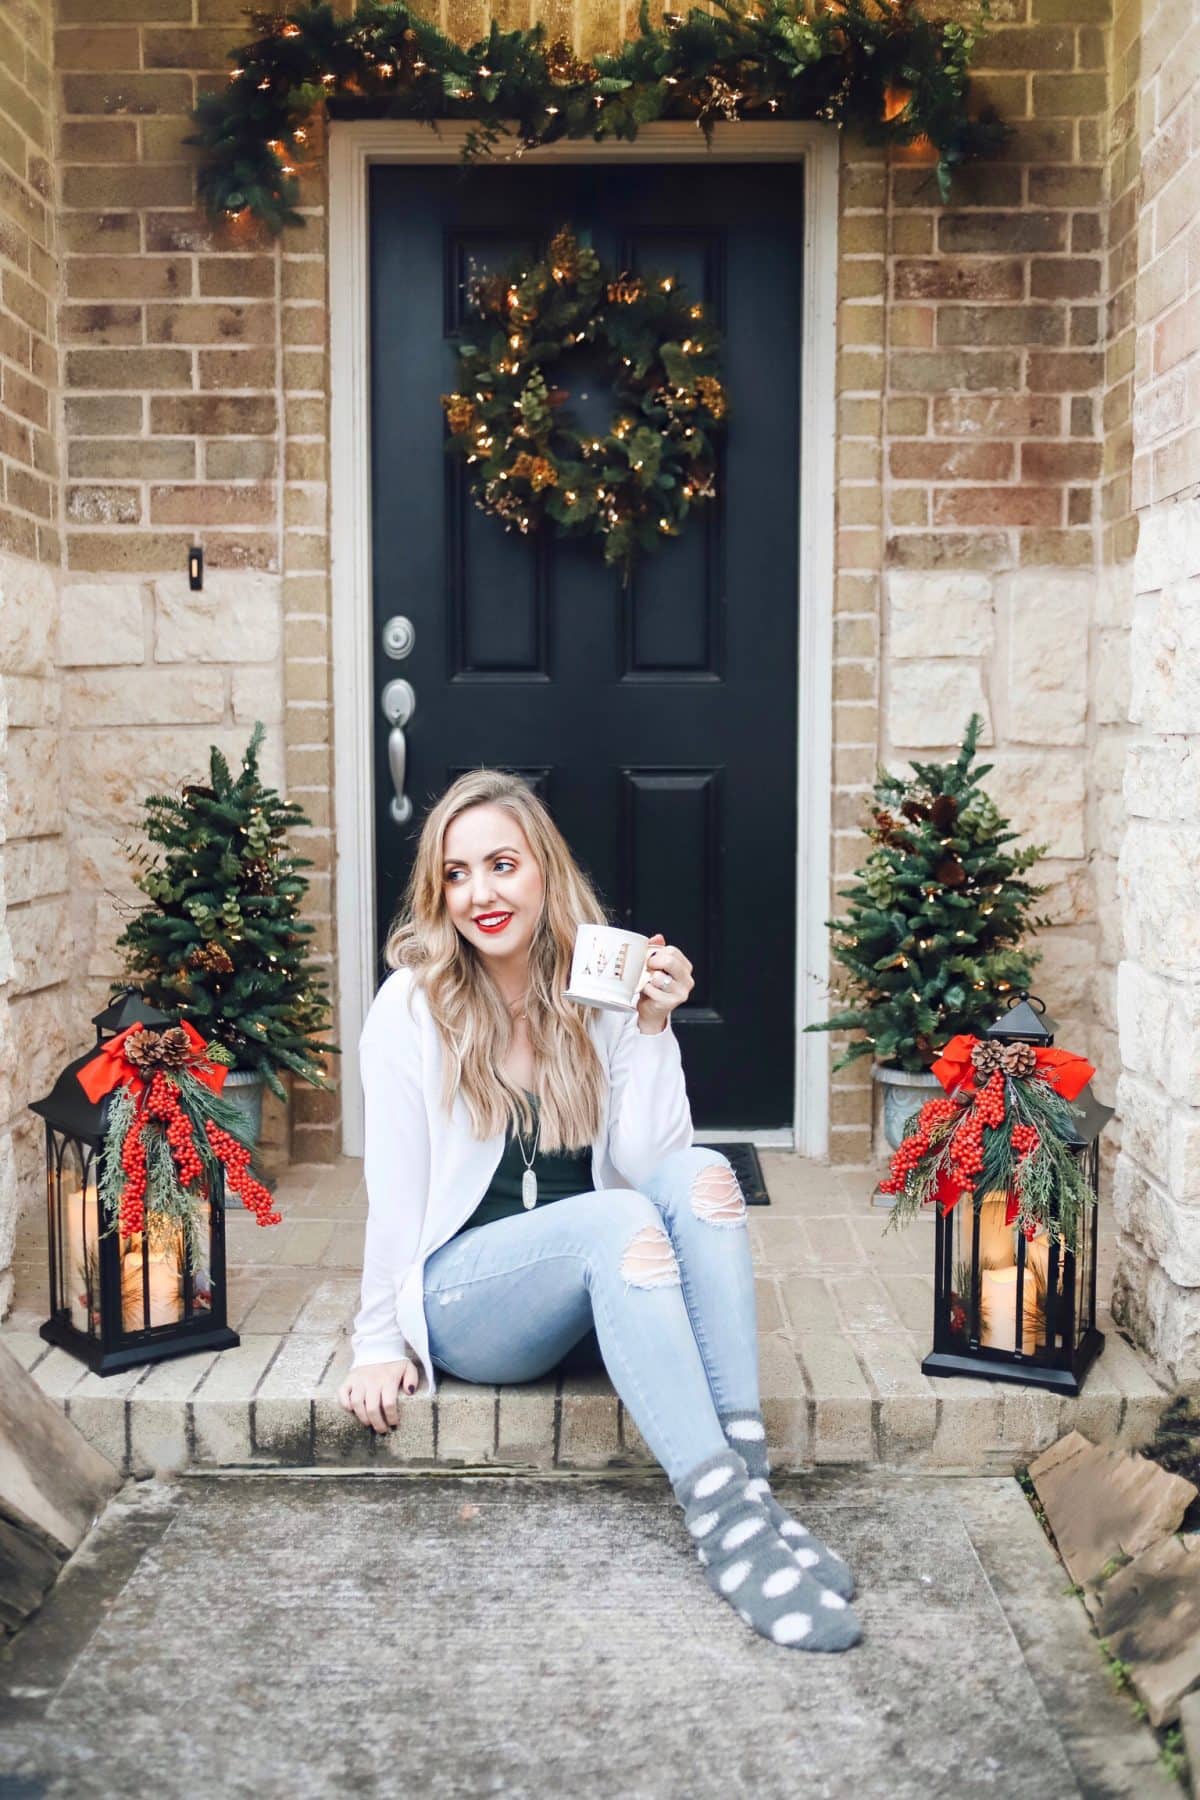 Houston blogger Meg O. on the Go shares her favorite holiday traditions and outdoor Christmas decor with Balsam Hill